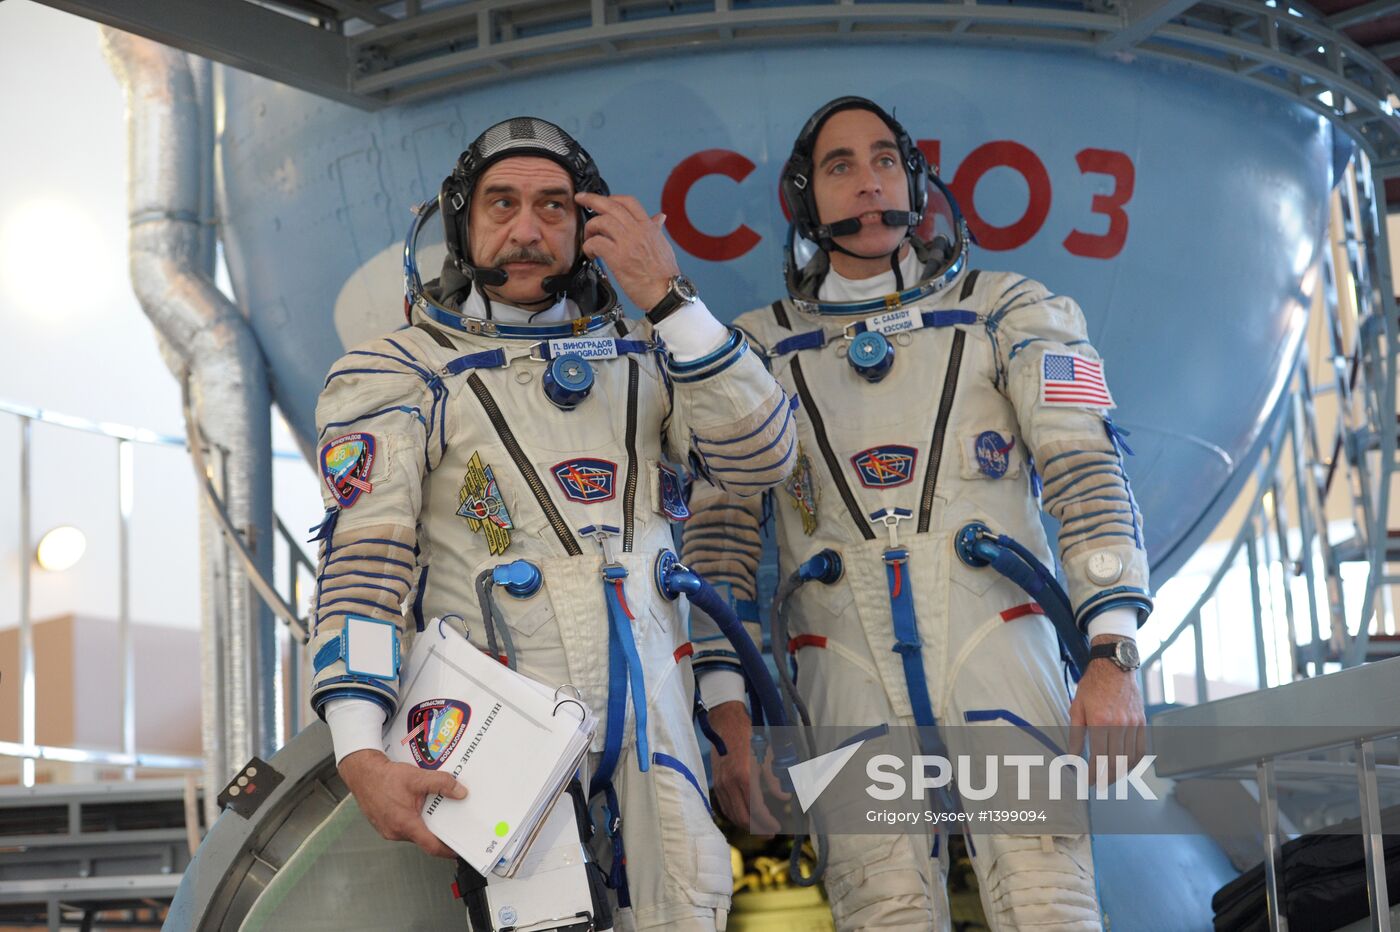 ISS Expedition 35/36 crew training